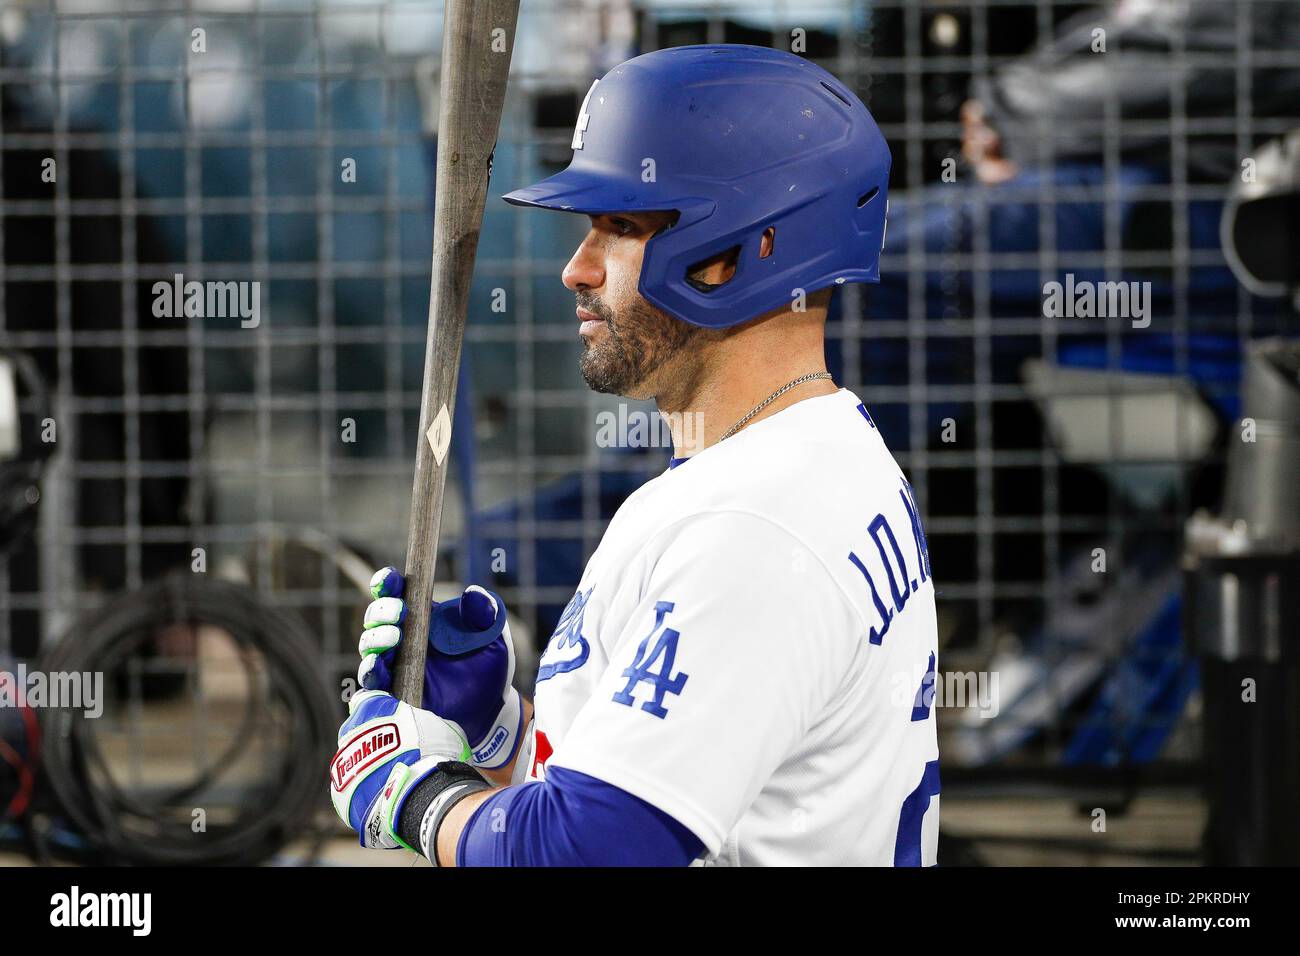 LOS ANGELES, CA - MARCH 31: Los Angeles Dodgers left fielder J.D. Martinez  (28) holds his bat in the dugout during a regular season game between the  Arizona Diamondbacks and Los Angeles